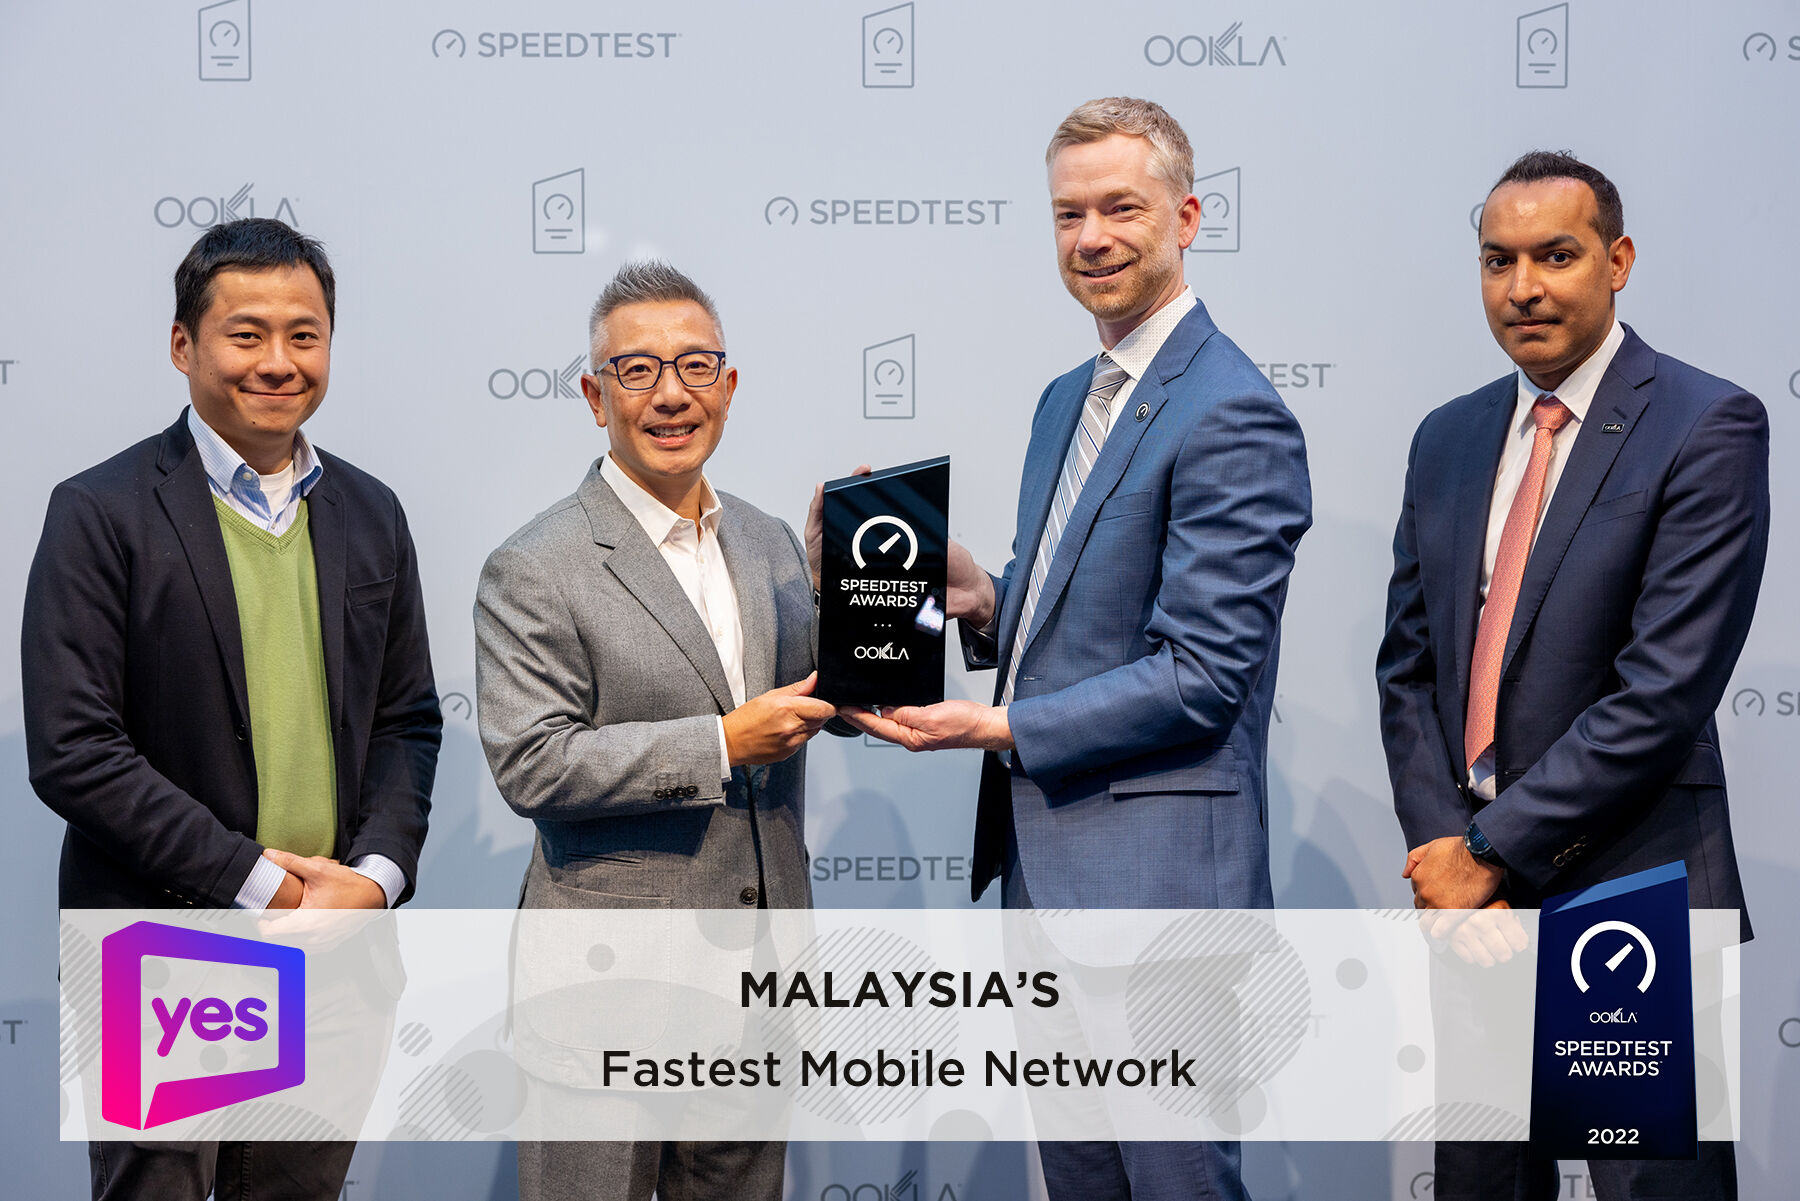 Yes 5G Crowned Ookla Speedtest Awards As Malaysia's Fastest Mobile Network 27